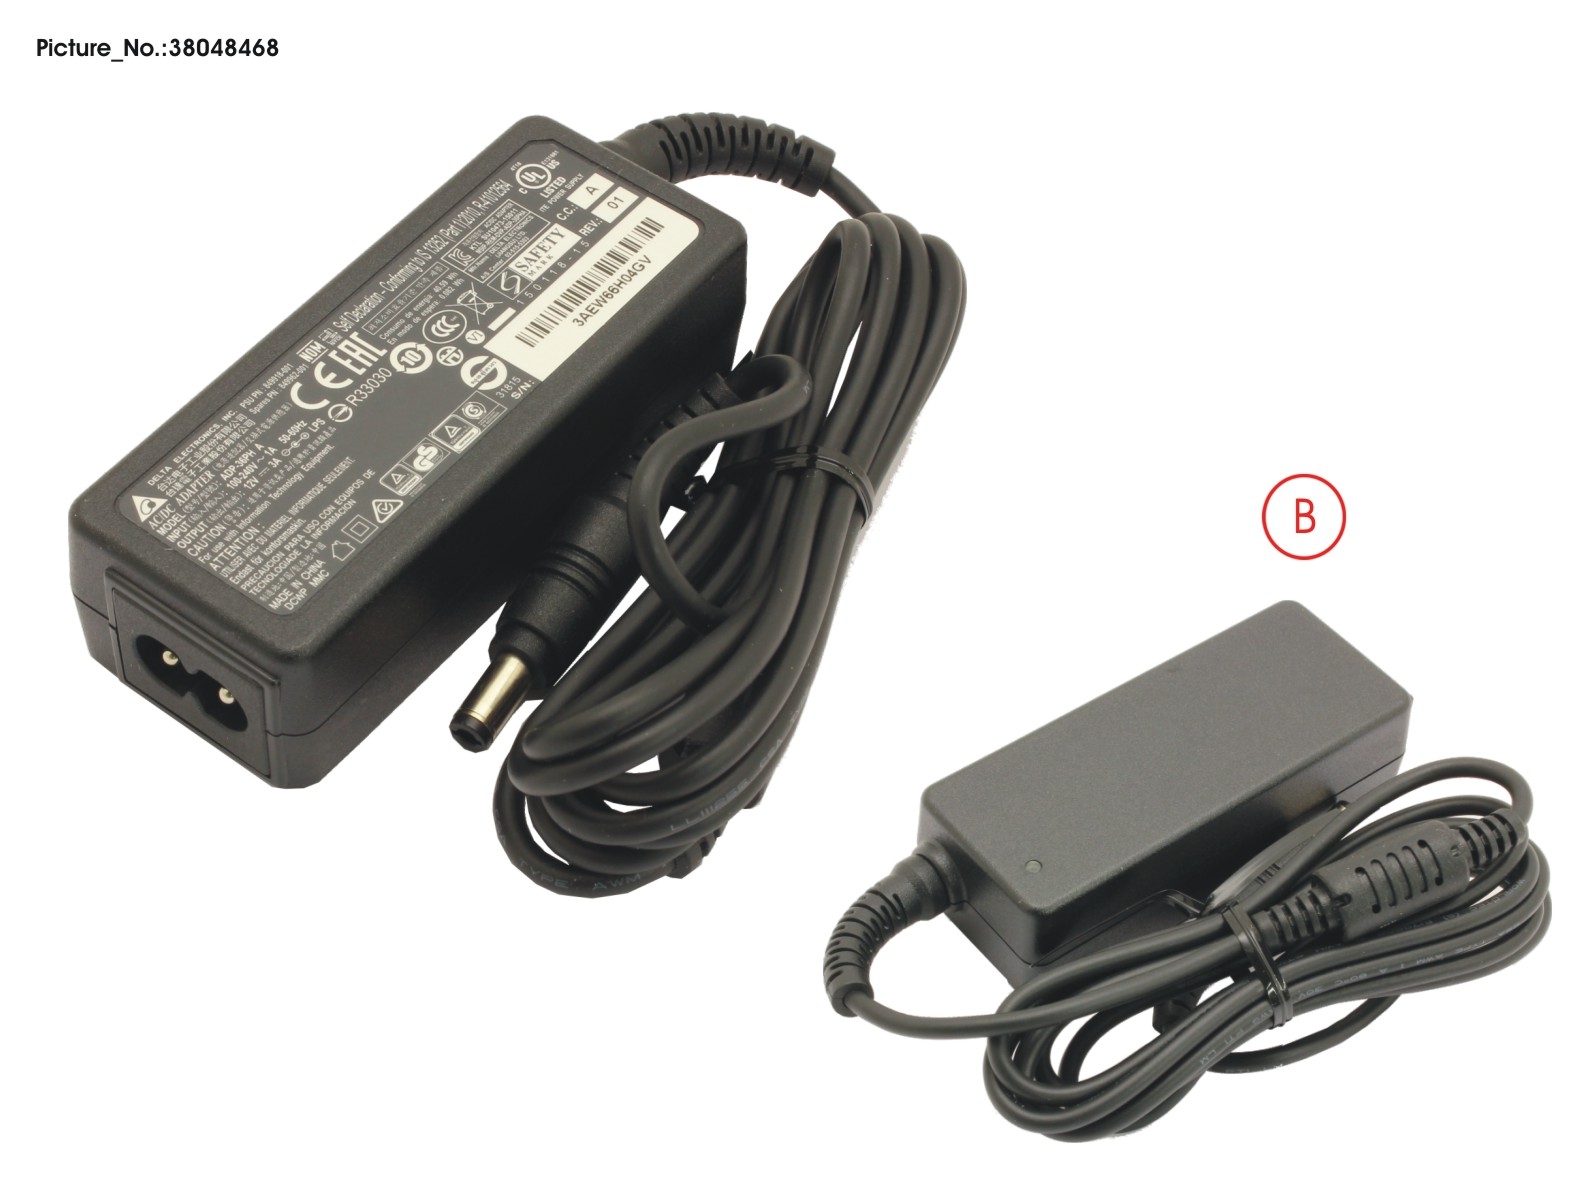 POWER ADAPTER FOR FUTRO L420 AND L620